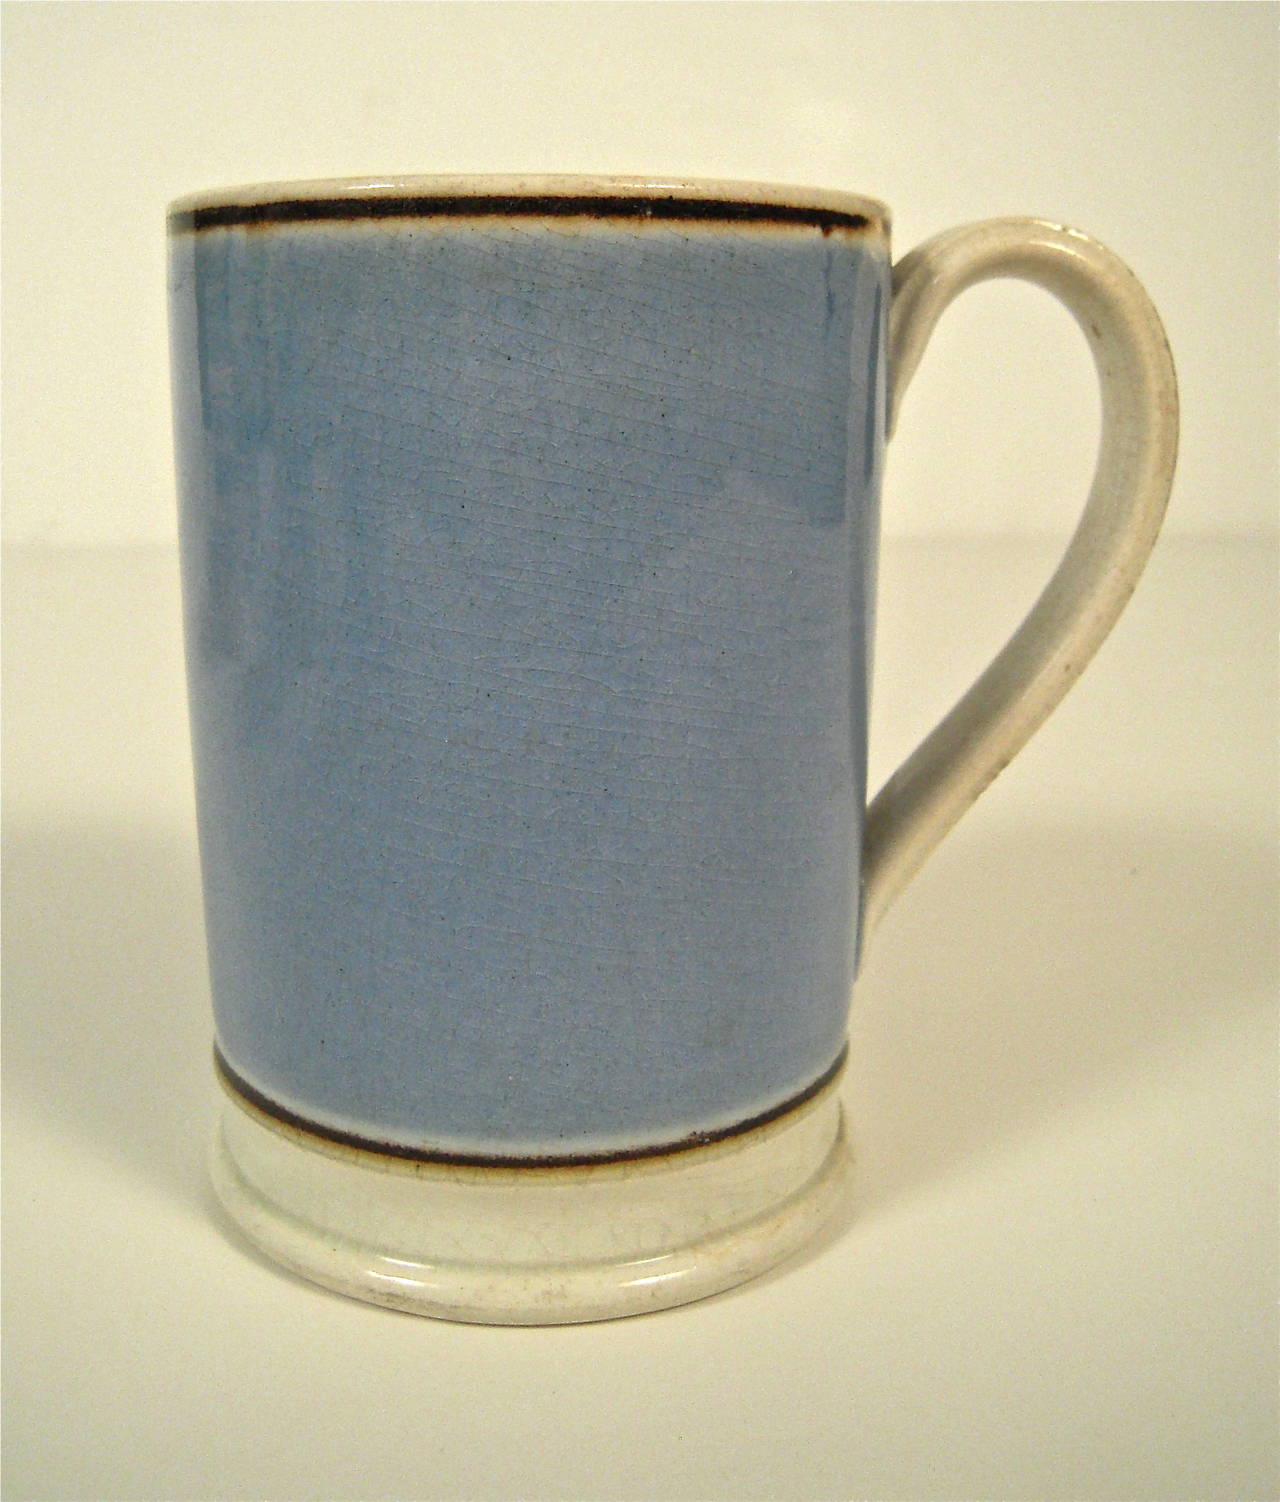 Glazed Collection of 19th Century Blue and White Staffordshire Mochaware Pottery